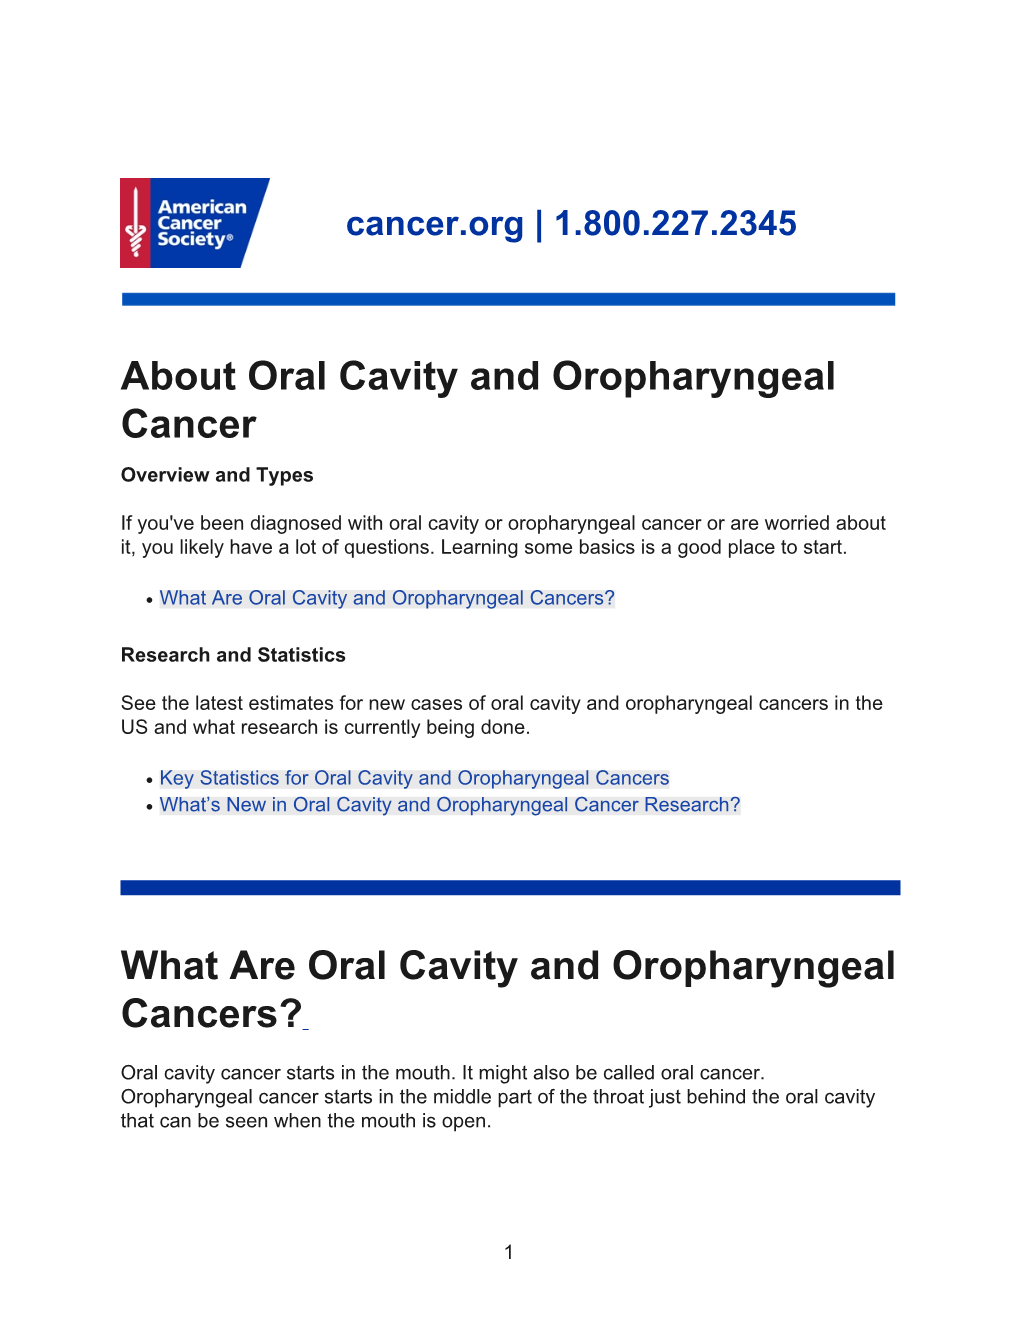 What Are Oral Cavity and Oropharyngeal Cancers?